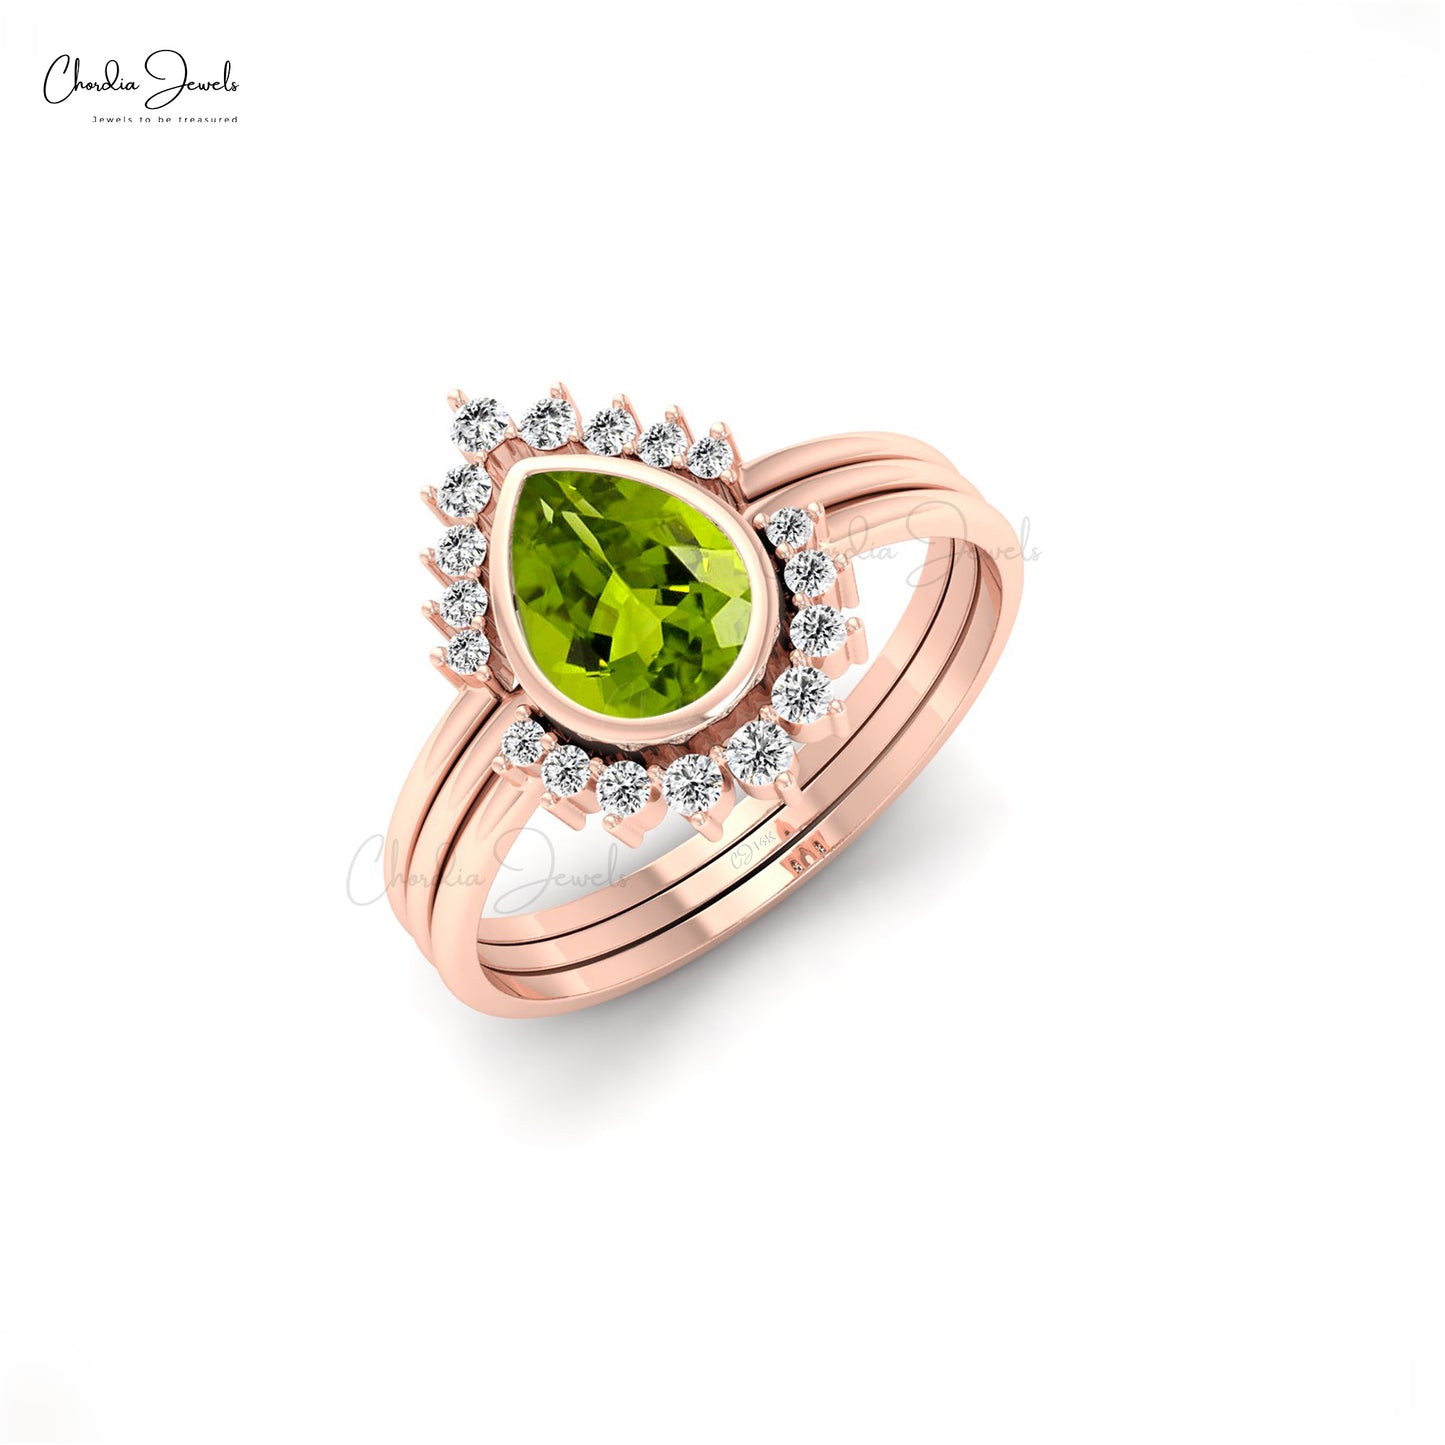 14k Gold Peridot Stackable Ring with Genuine Diamonds August Birthstone Handcrafted Ring